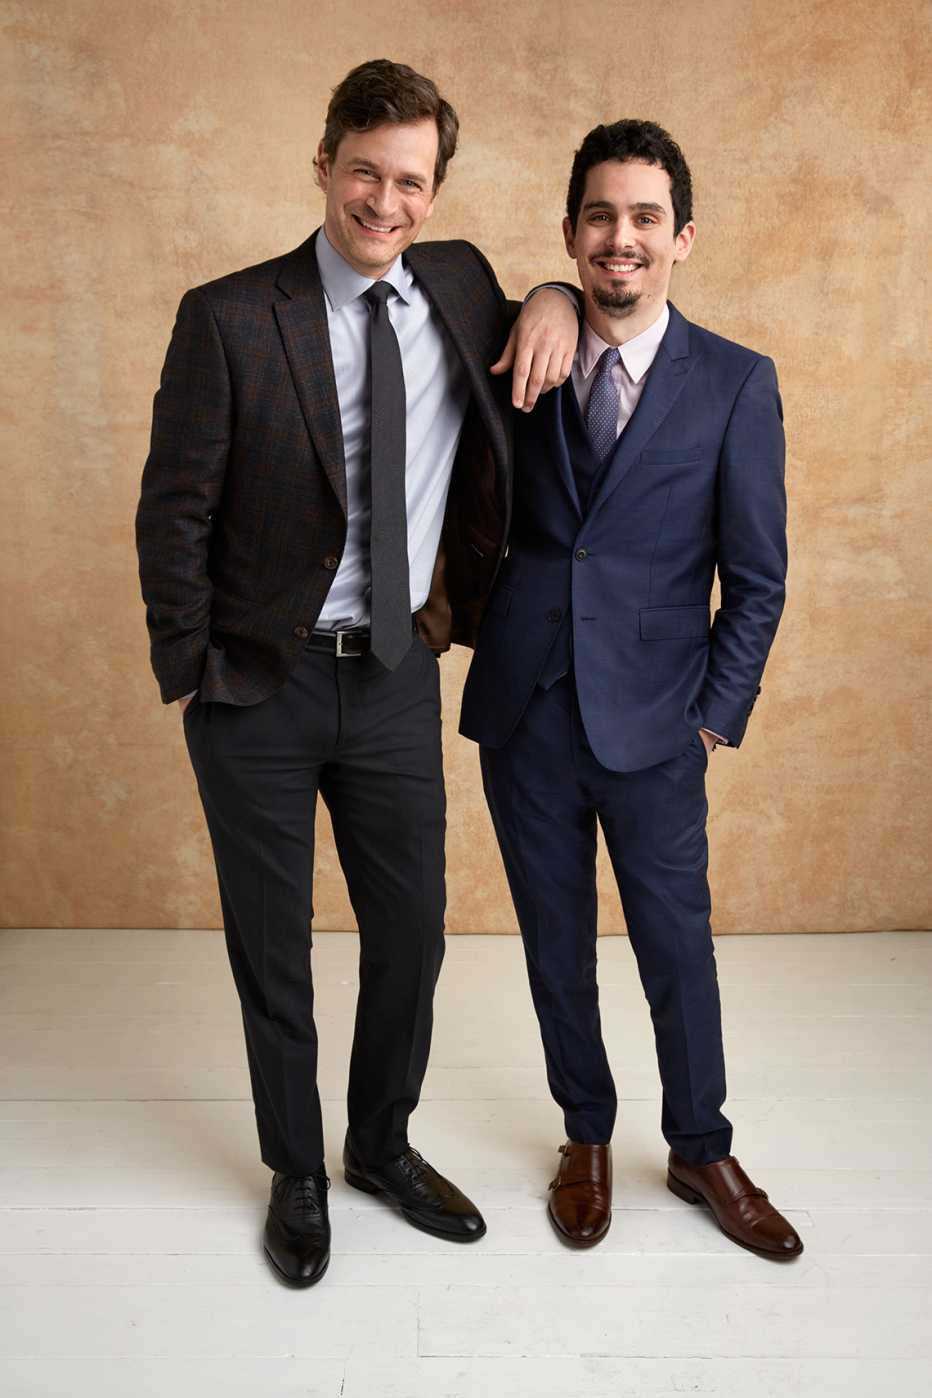 Tom Everett Scott and Damien Chazelle at the 16th Annual AARP The Magazine's Movies for Grownups Awards